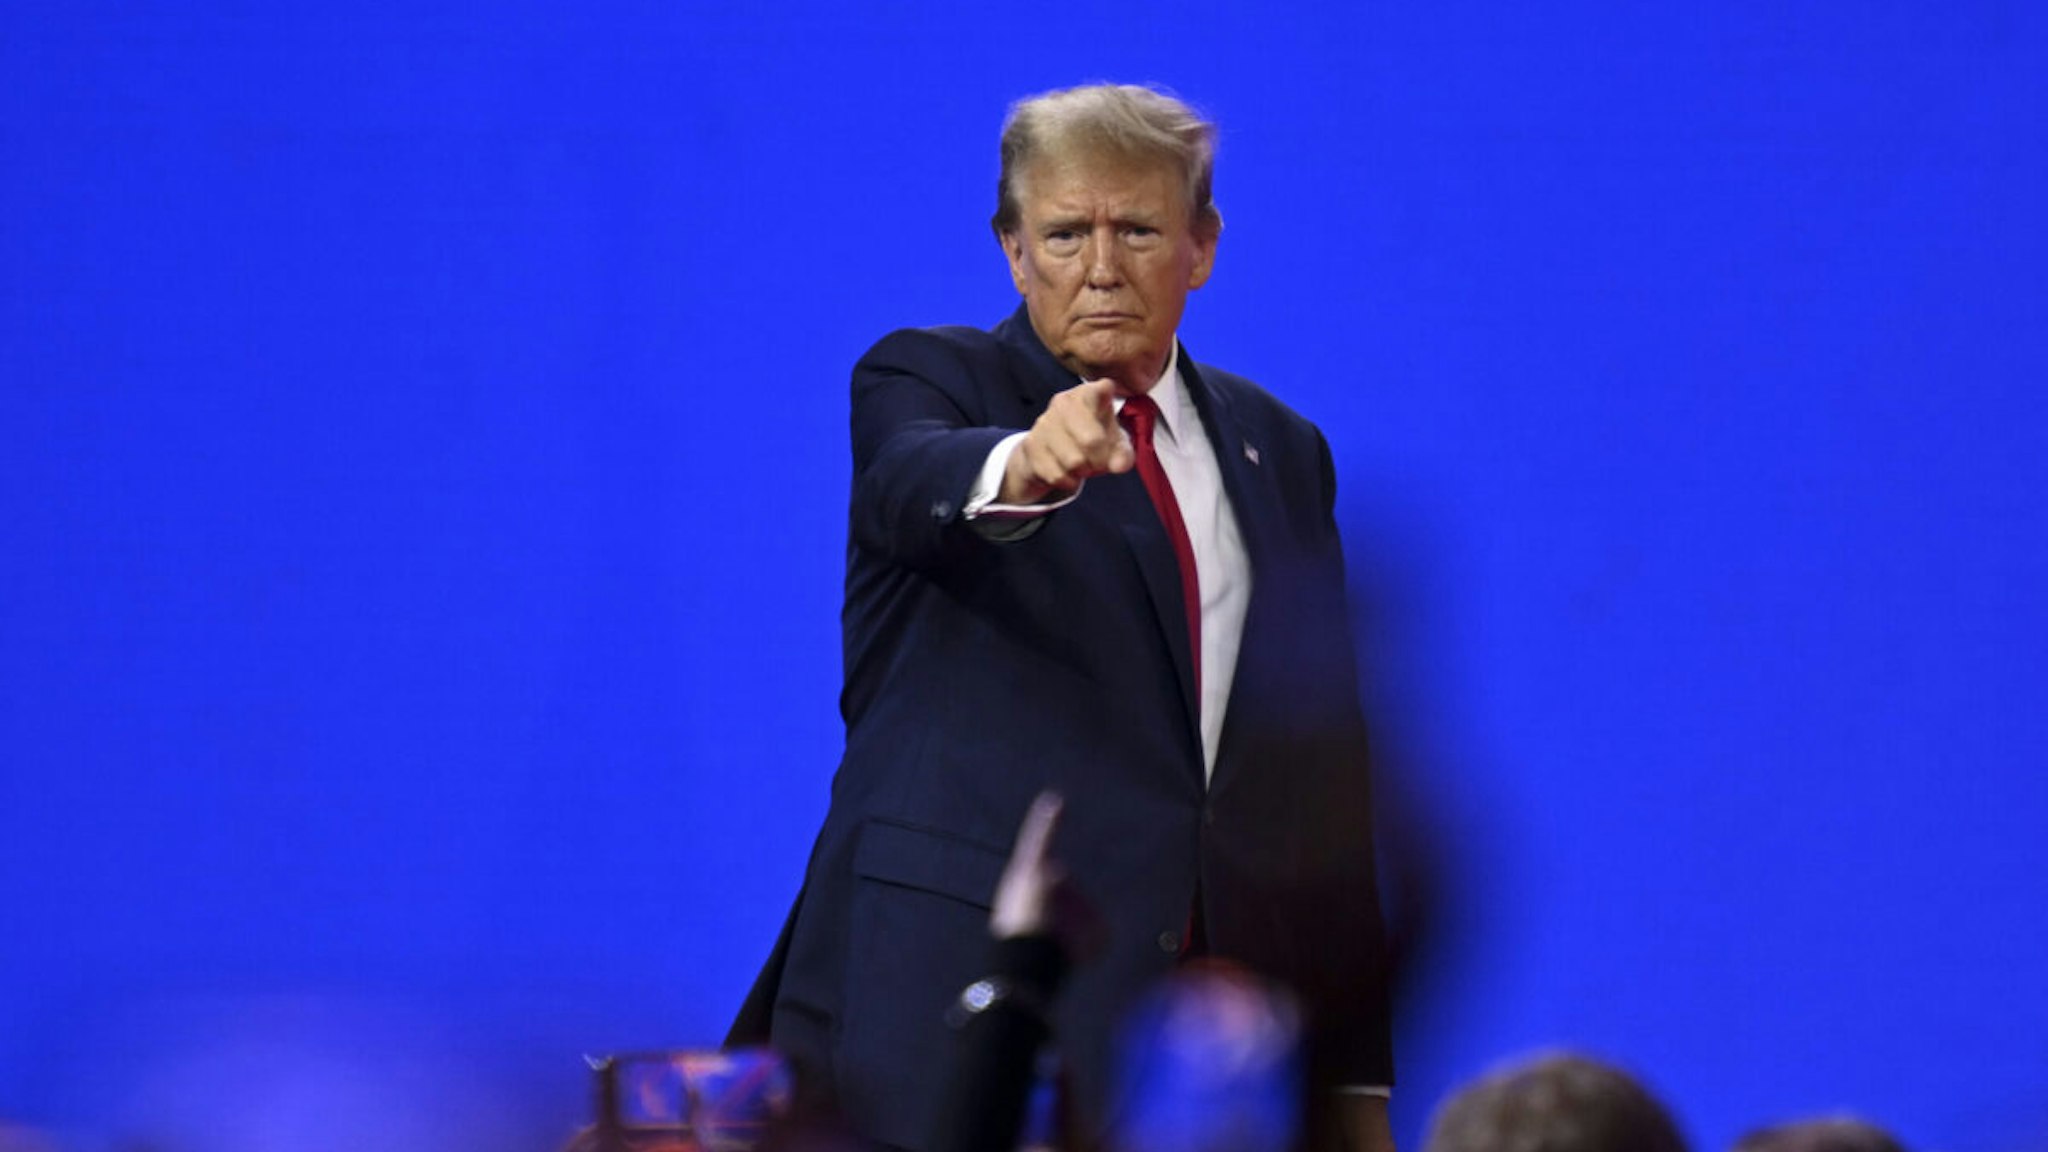 Former US President Donald Trump makes a speech as he attends the 2024 Conservative Political Action Conference (CPAC) at the Gaylord National Resort and Convention Center in National Harbor, Maryland, United States on February 24, 2024.